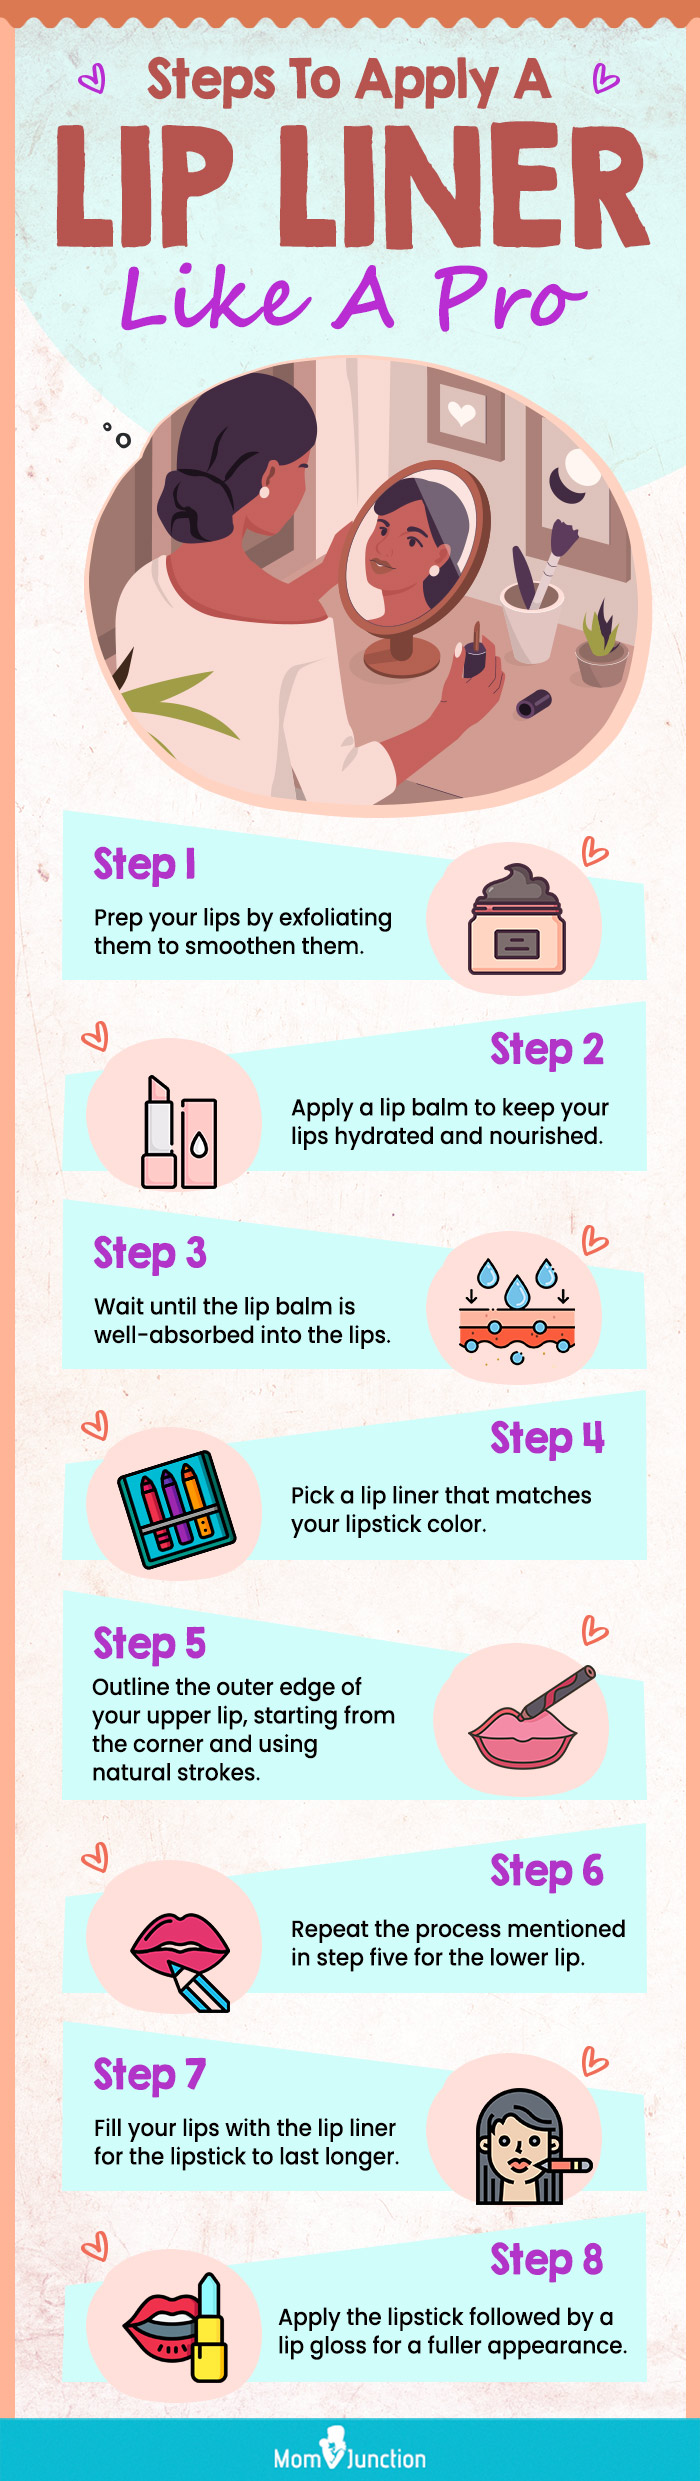 Steps To Apply A Lip Liner Like A Pro (infographic)